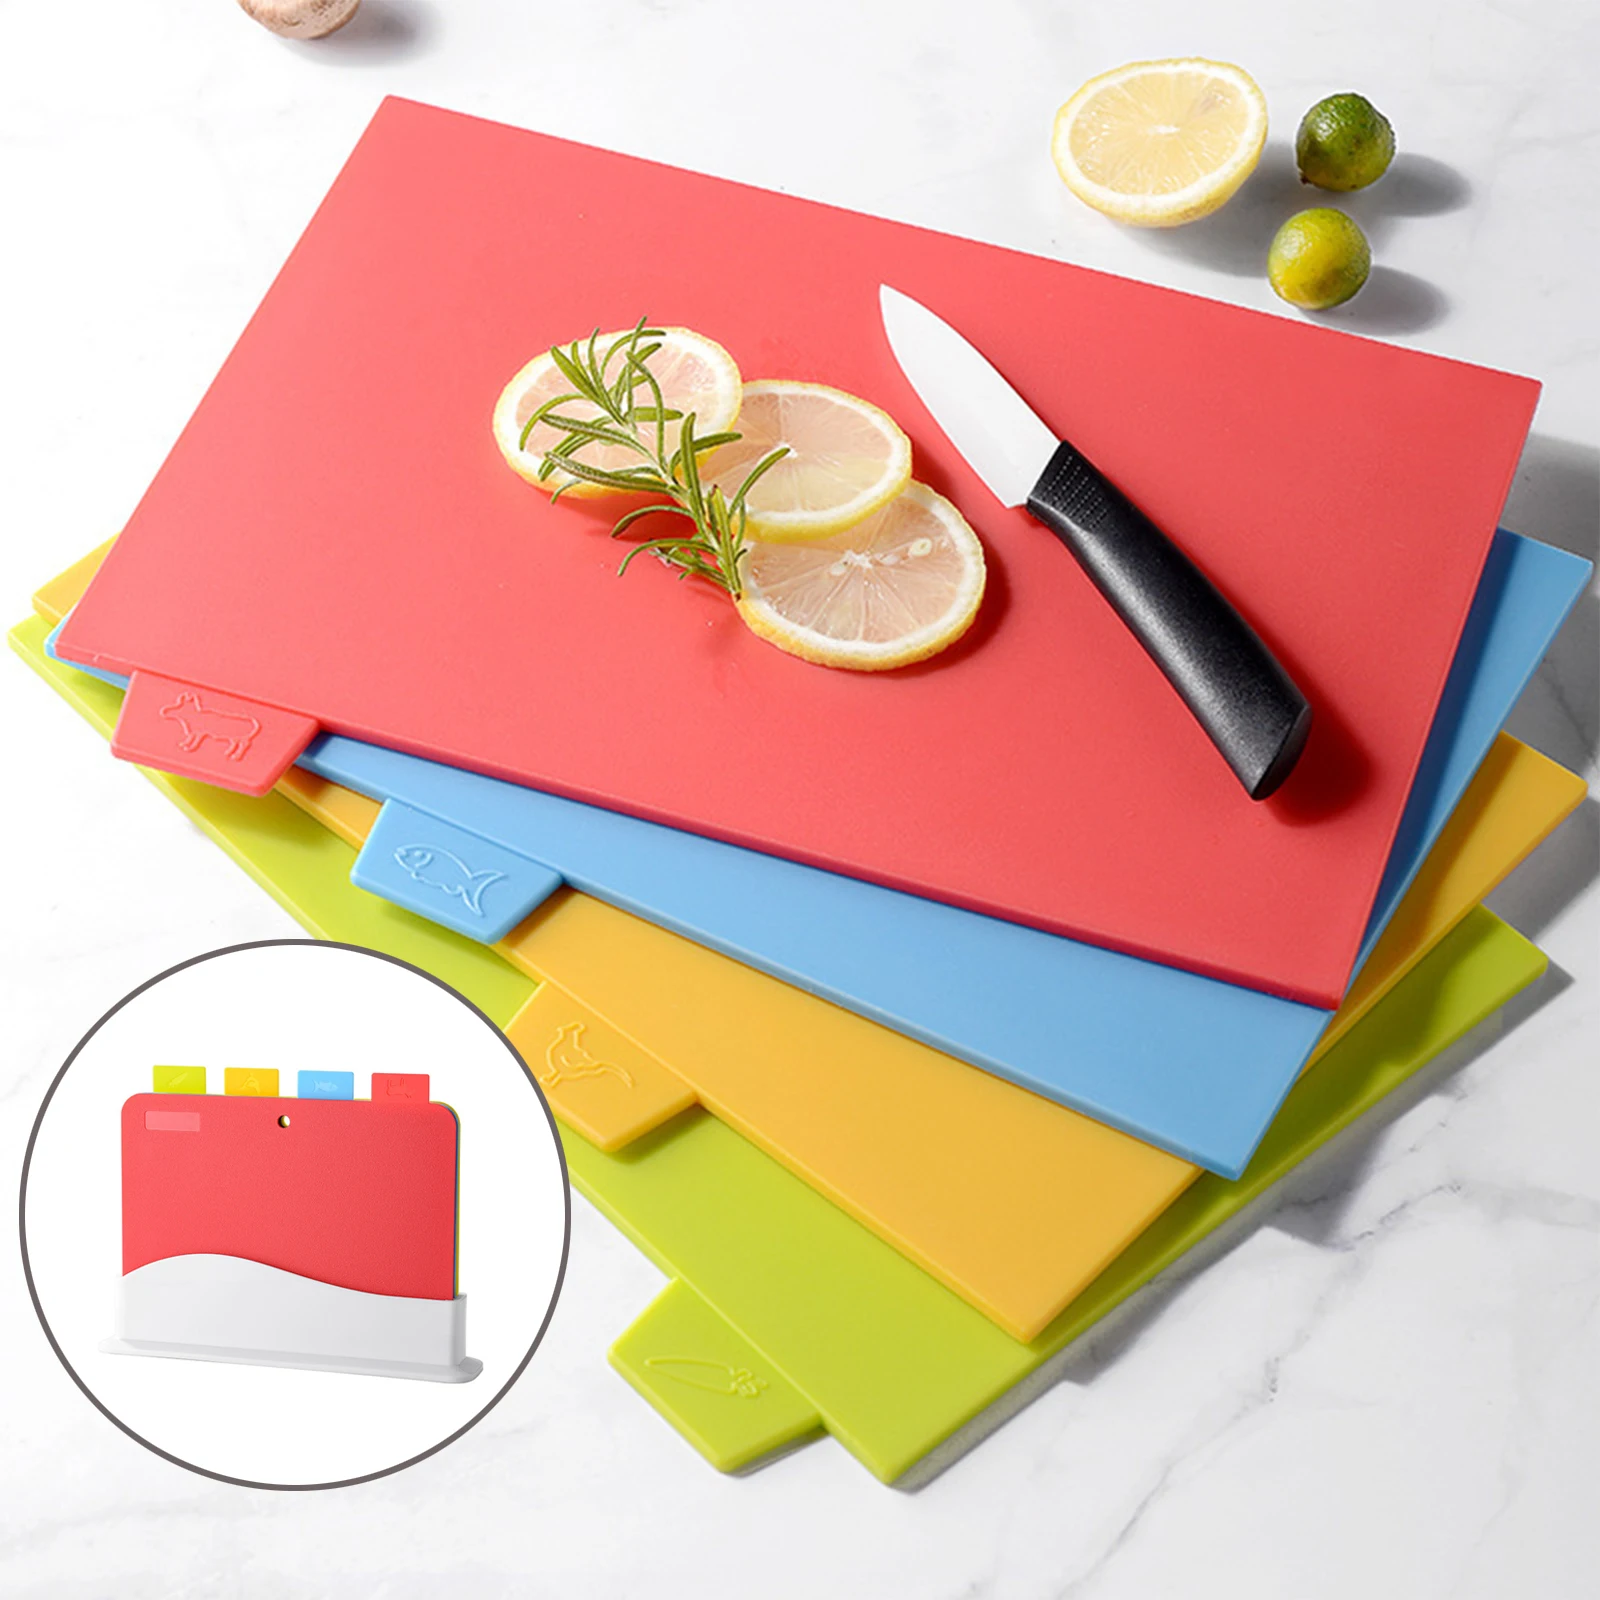 

Professional Chopping Board Set 4 PCS Index Colour Coded Plastic Cutting Boards with Storage Stand, Non Slip Cutting Board Sets